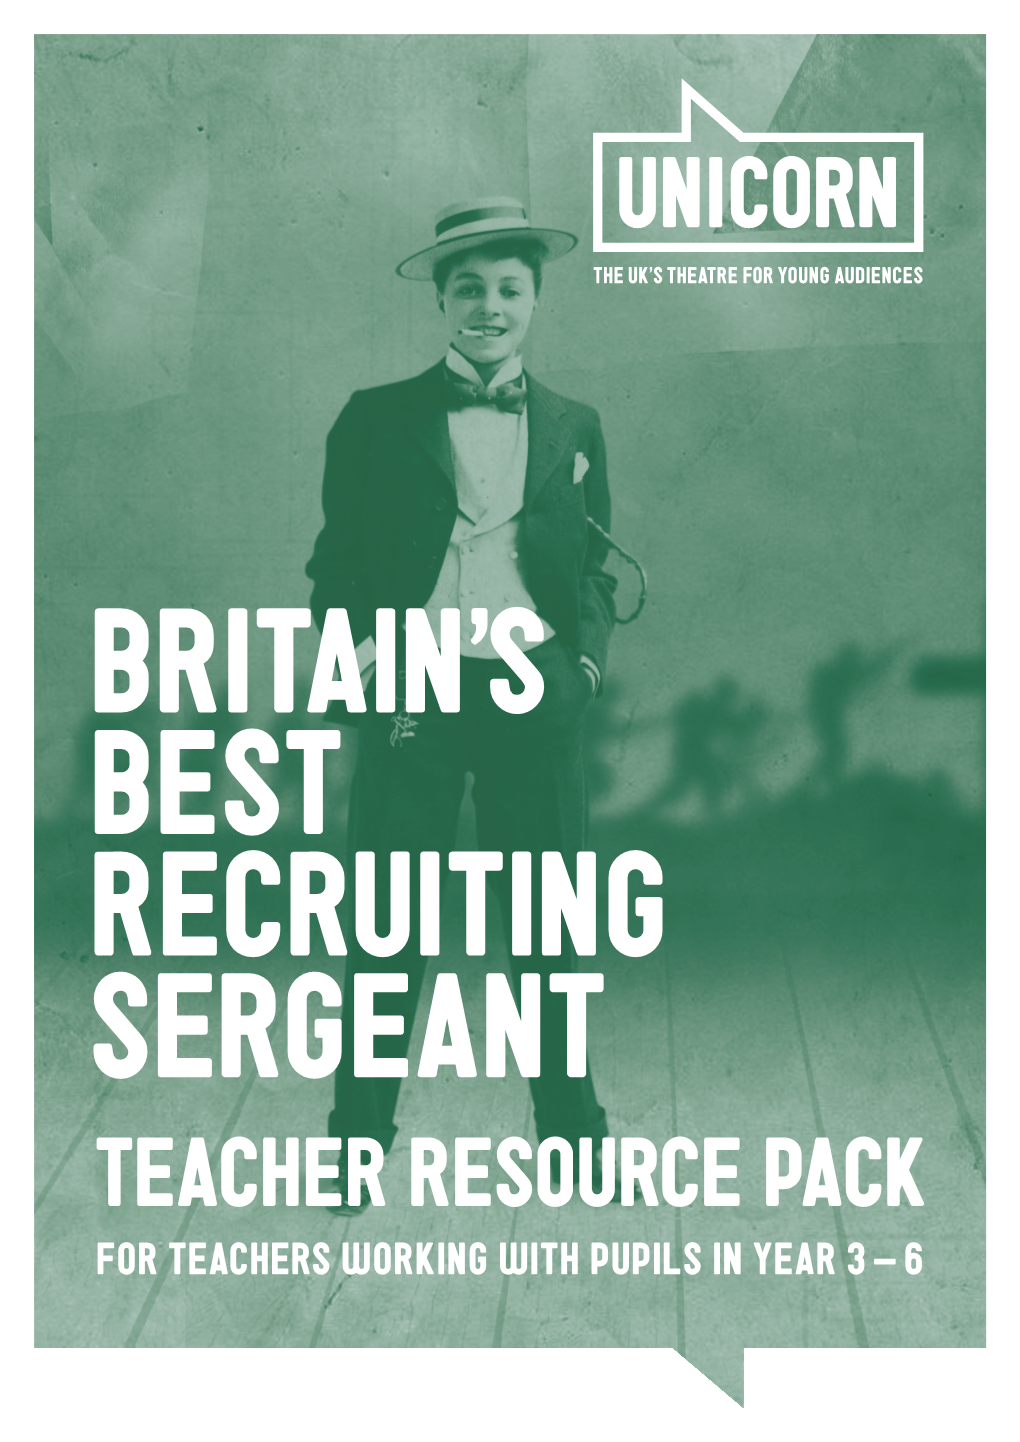 Teacher Resource Pack for Teachers Working with Pupils in Year 3 – 6 Britain’S Best Recruiting Sergeant Running from 13 Feb - 15 Mar 2015